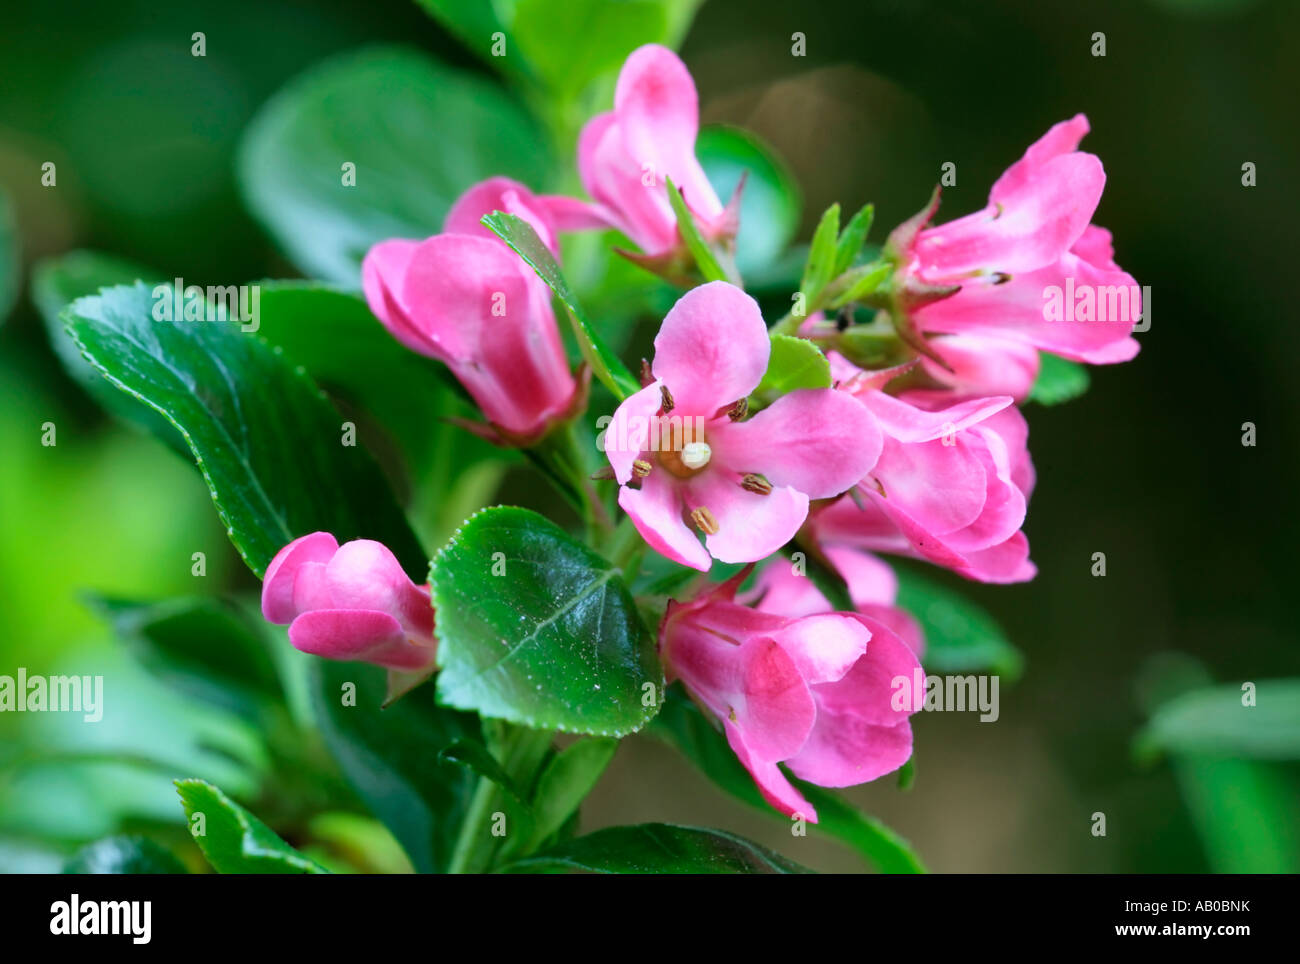 Pink flowerhead of Escallonia shrub in bloom in Summer, UK Stock Photo